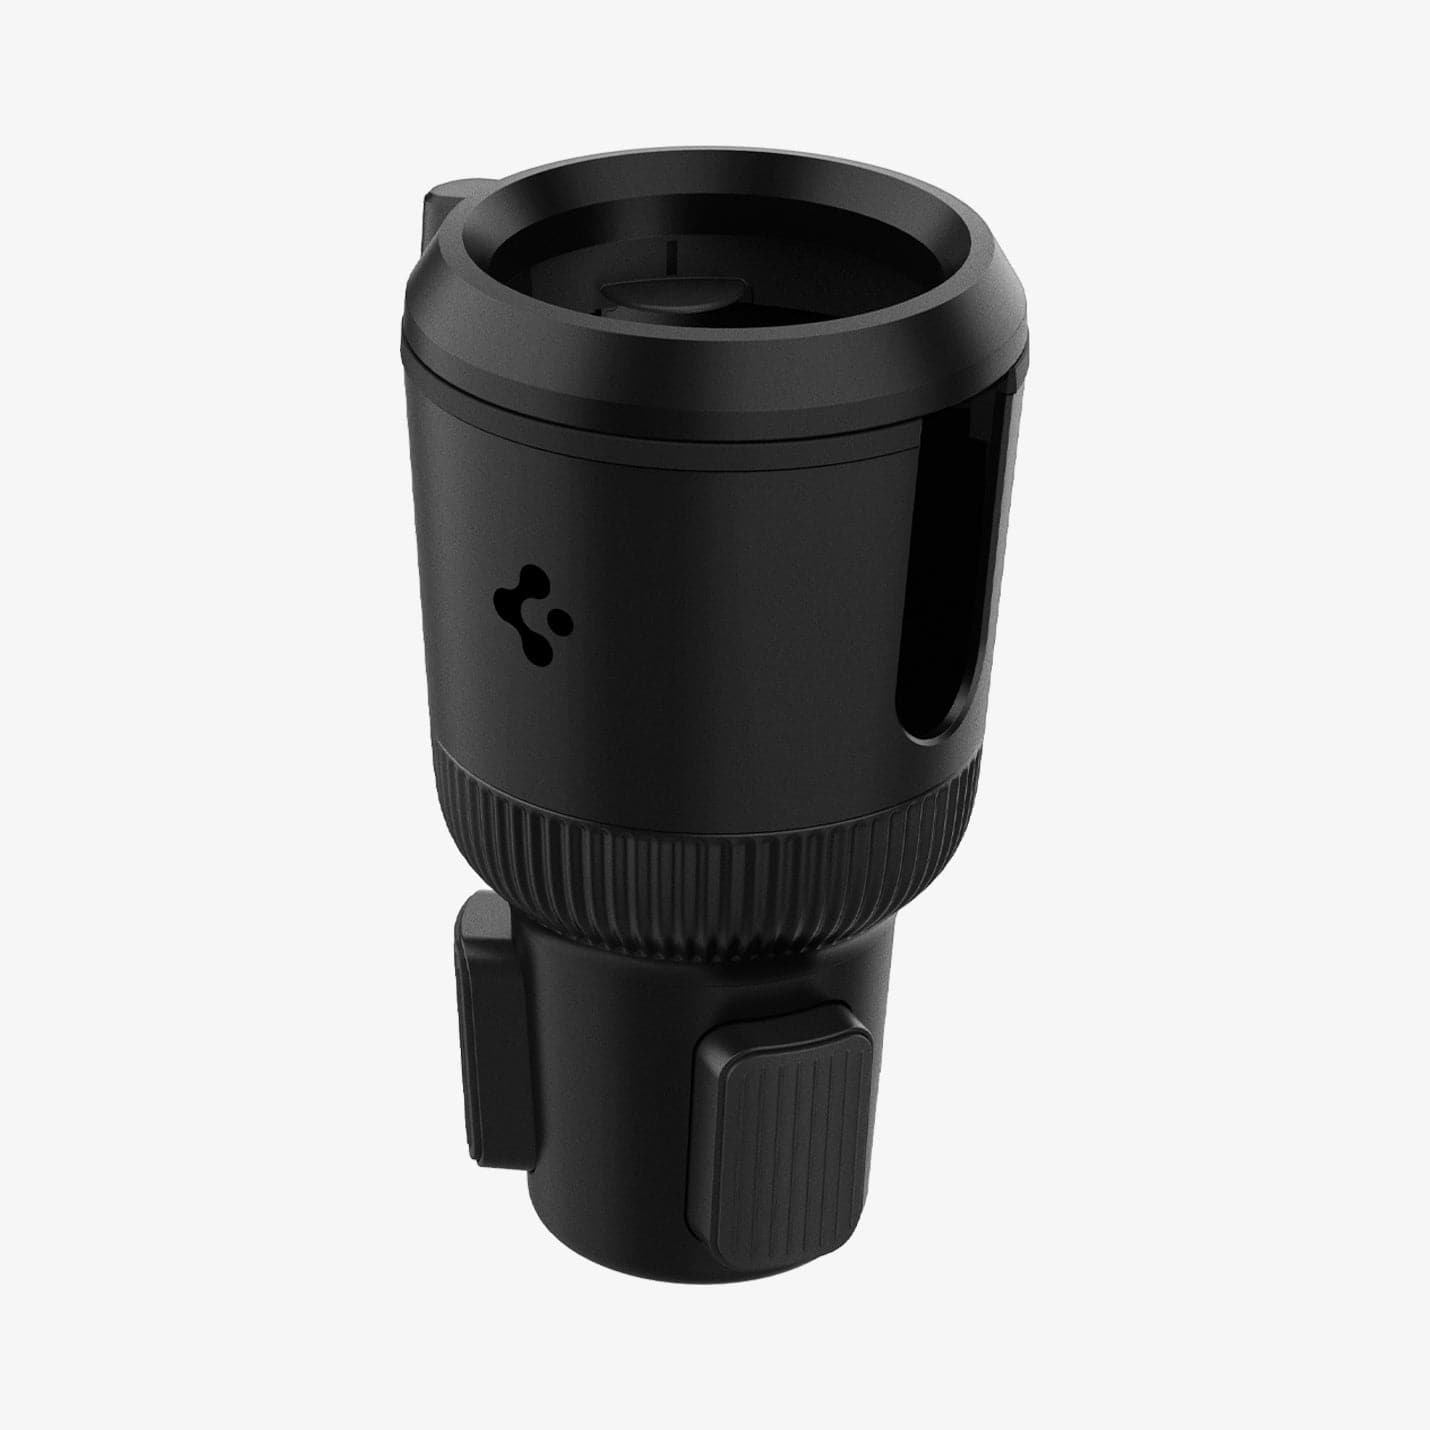 ACP02235 - CH100 Hydrohub Cup Holder Adapter in black showing the front and side